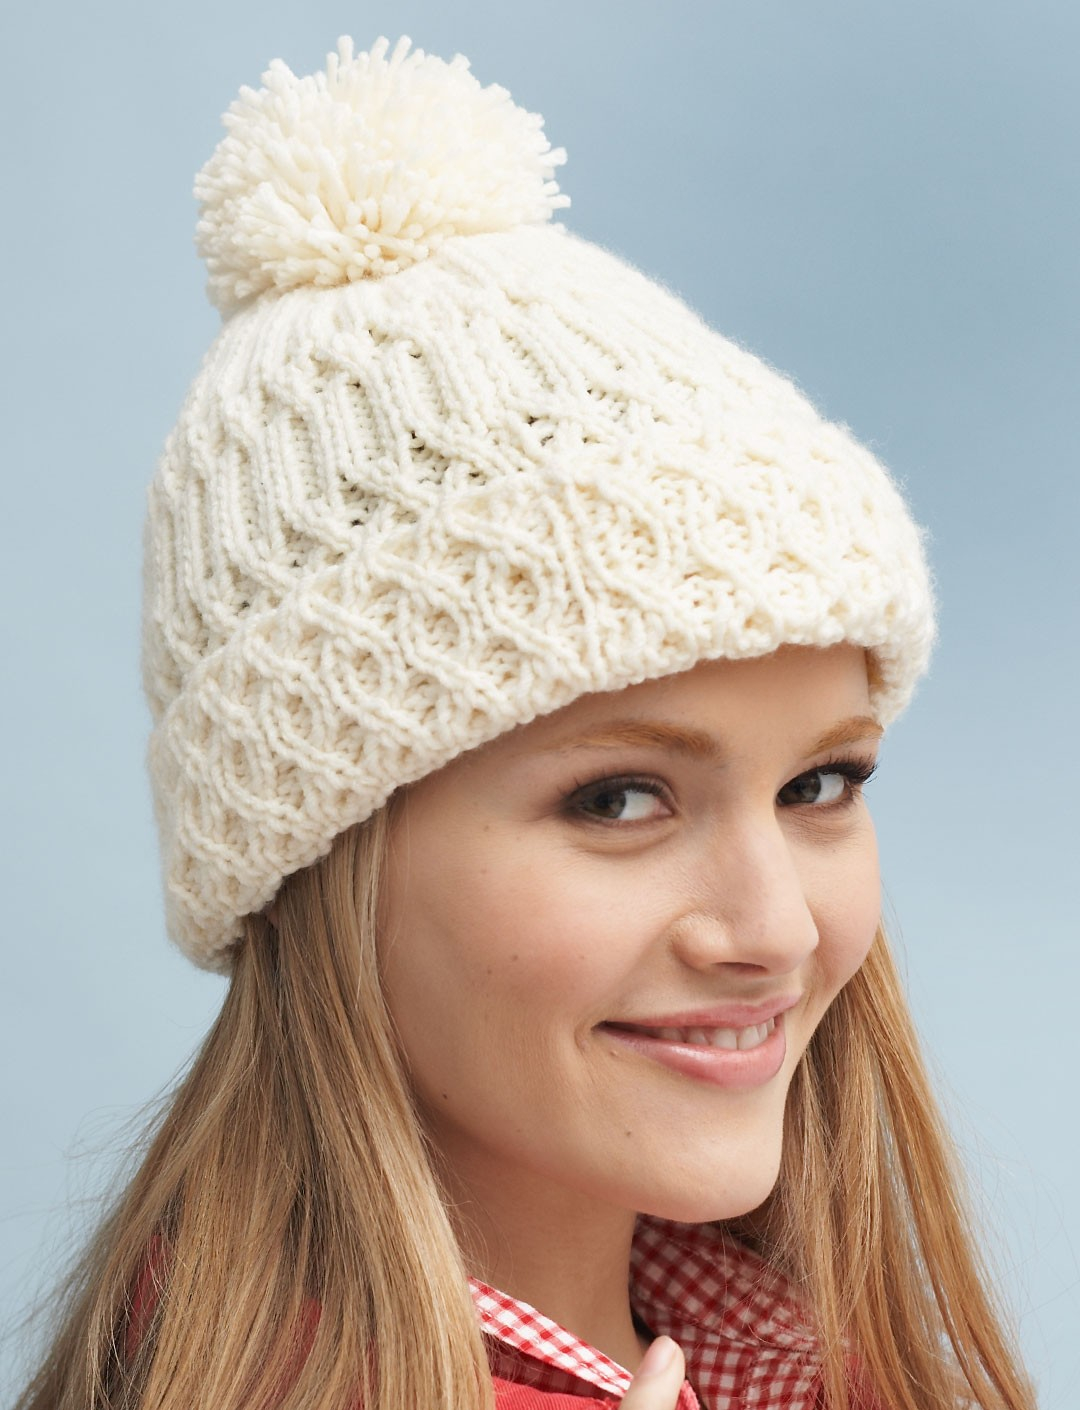 Bobble Hat Knitting Pattern Free The Easy Hat Knitting Patterns Crochet And Knitting Patterns 2019